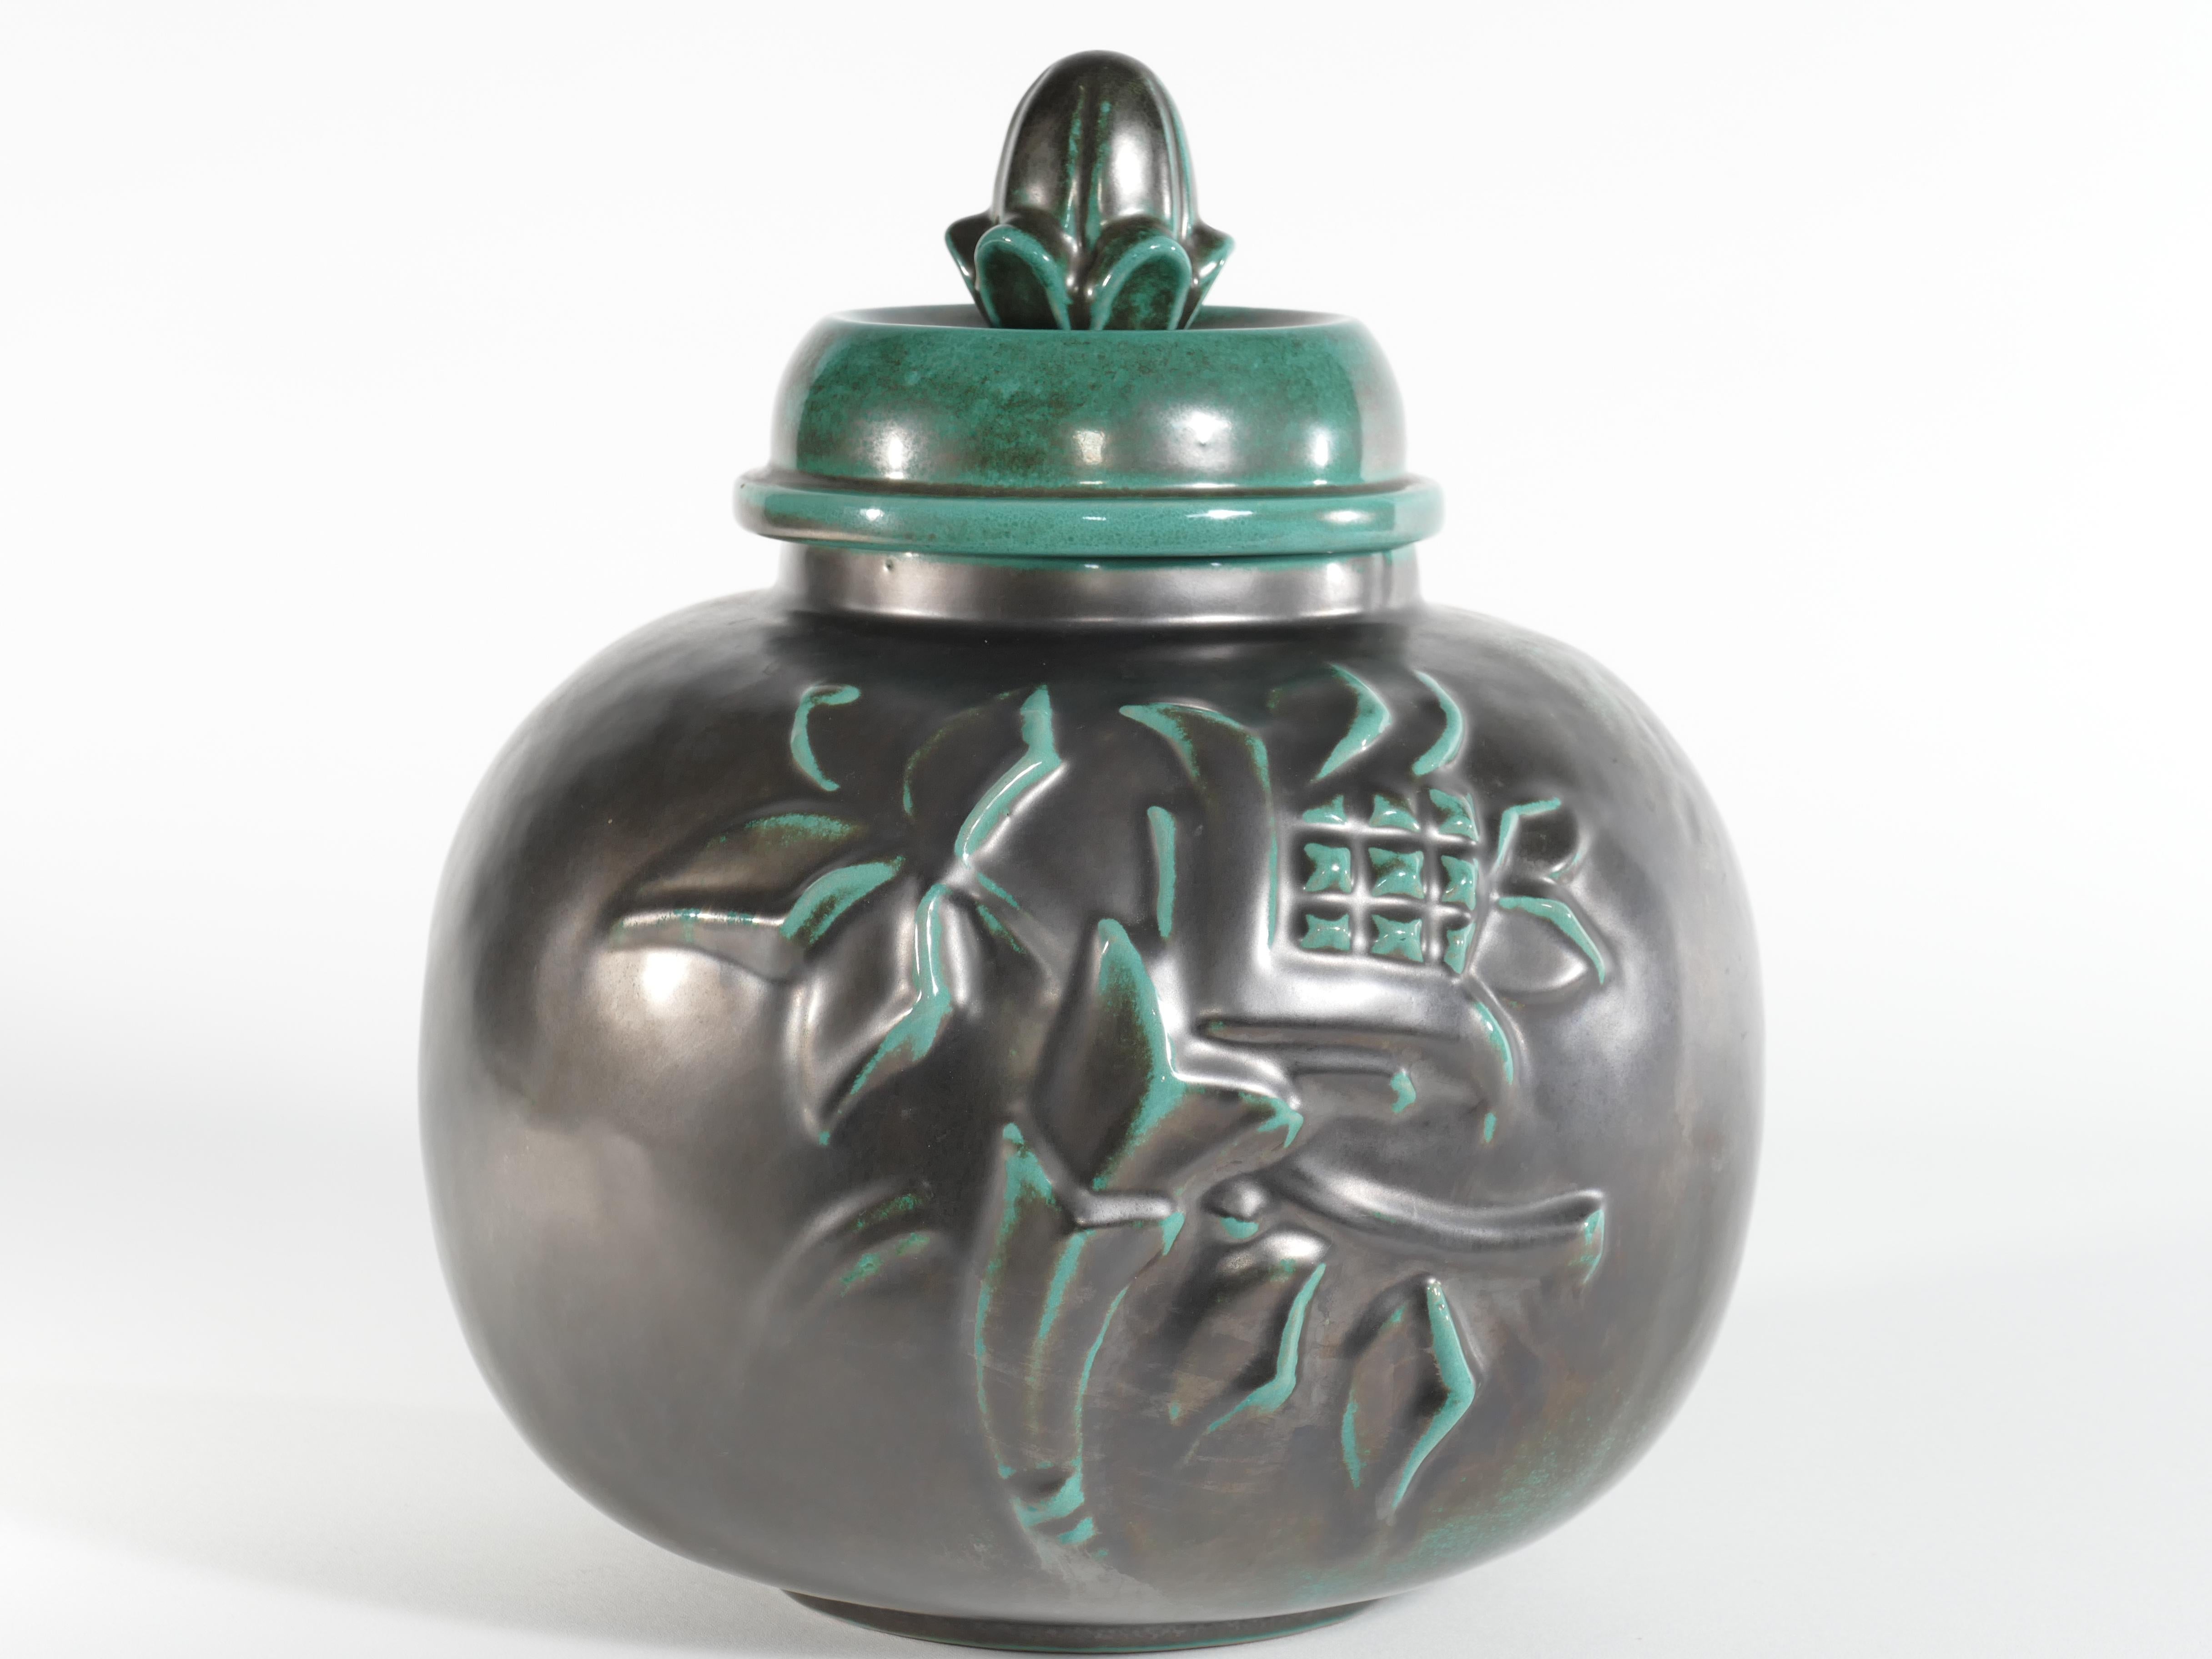 Large Art Deco Green Lidded Jar by Anna-Lisa Thomson for Upsala-Ekeby, 1930's In Good Condition For Sale In Grythyttan, SE